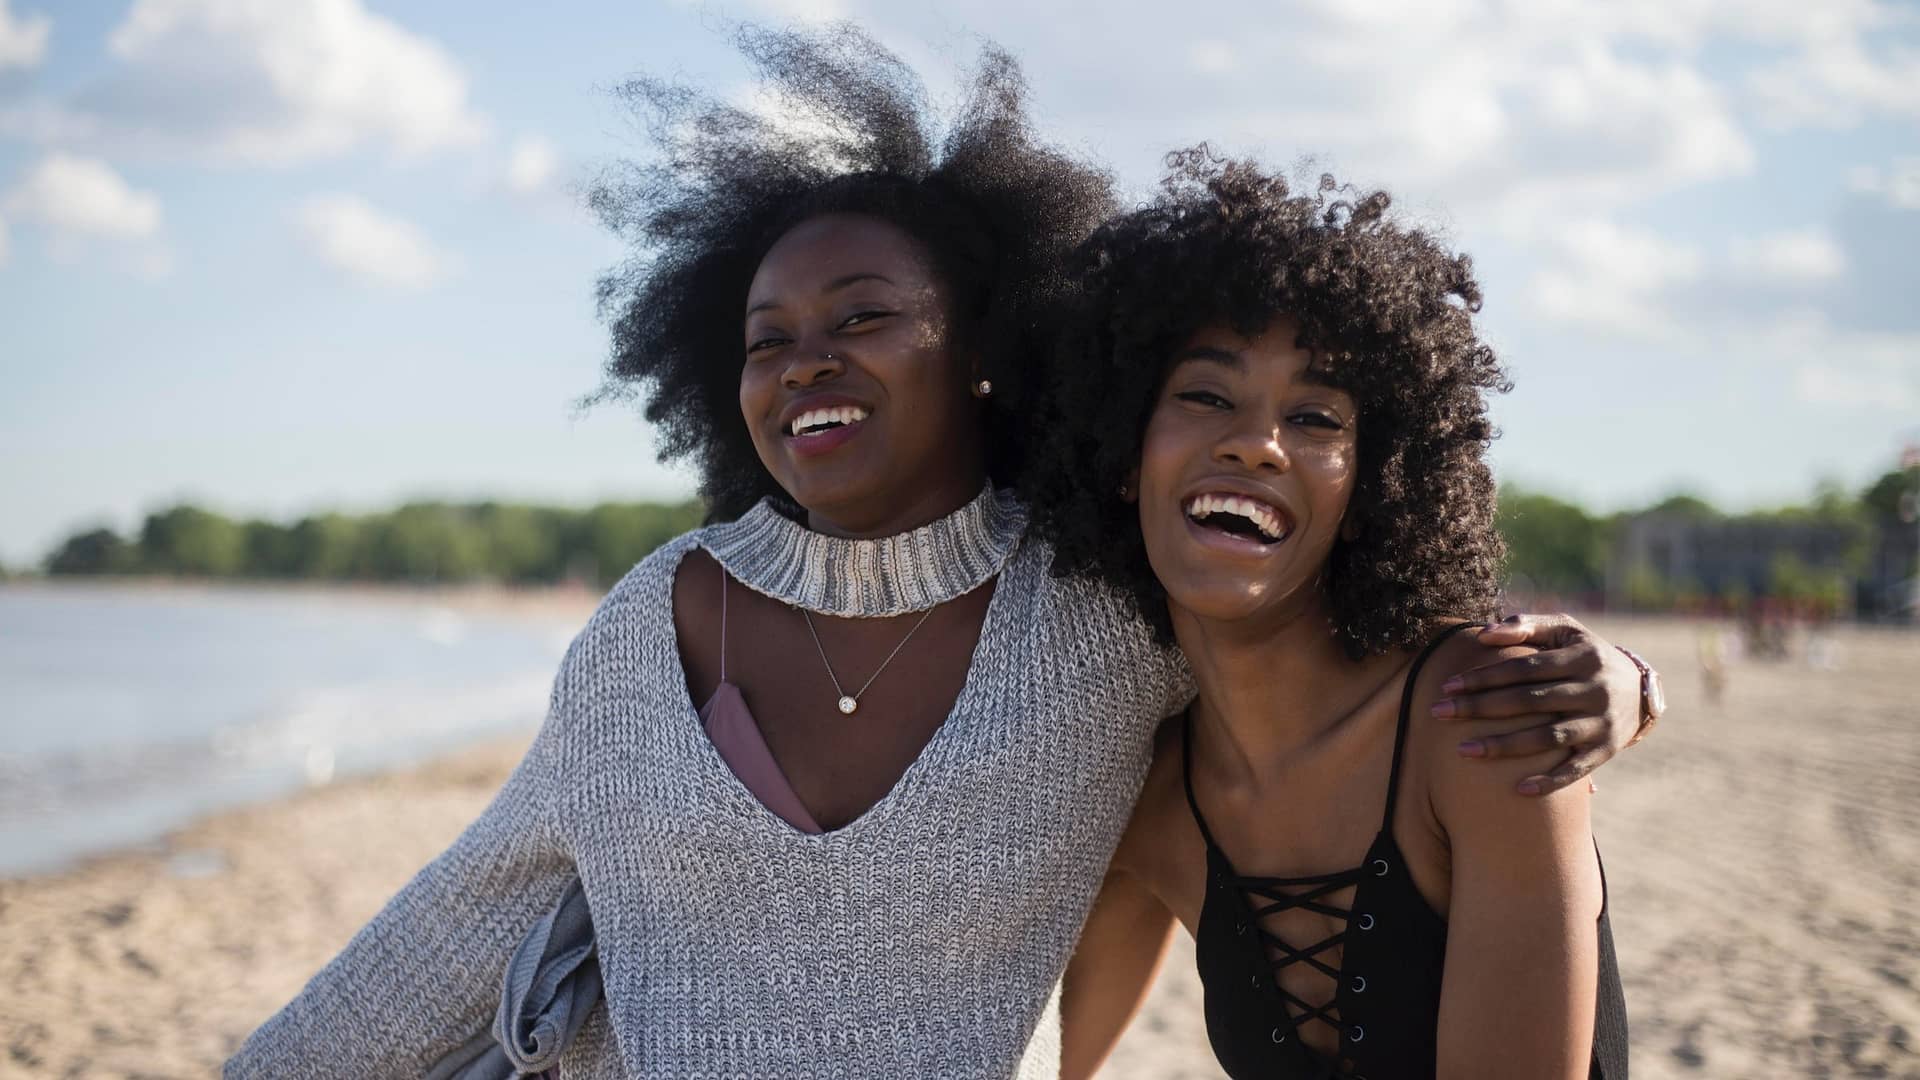 Image: Two black women on a beach, one with her arm slung around the other's shoulders in friendship. Both friends are laughing.